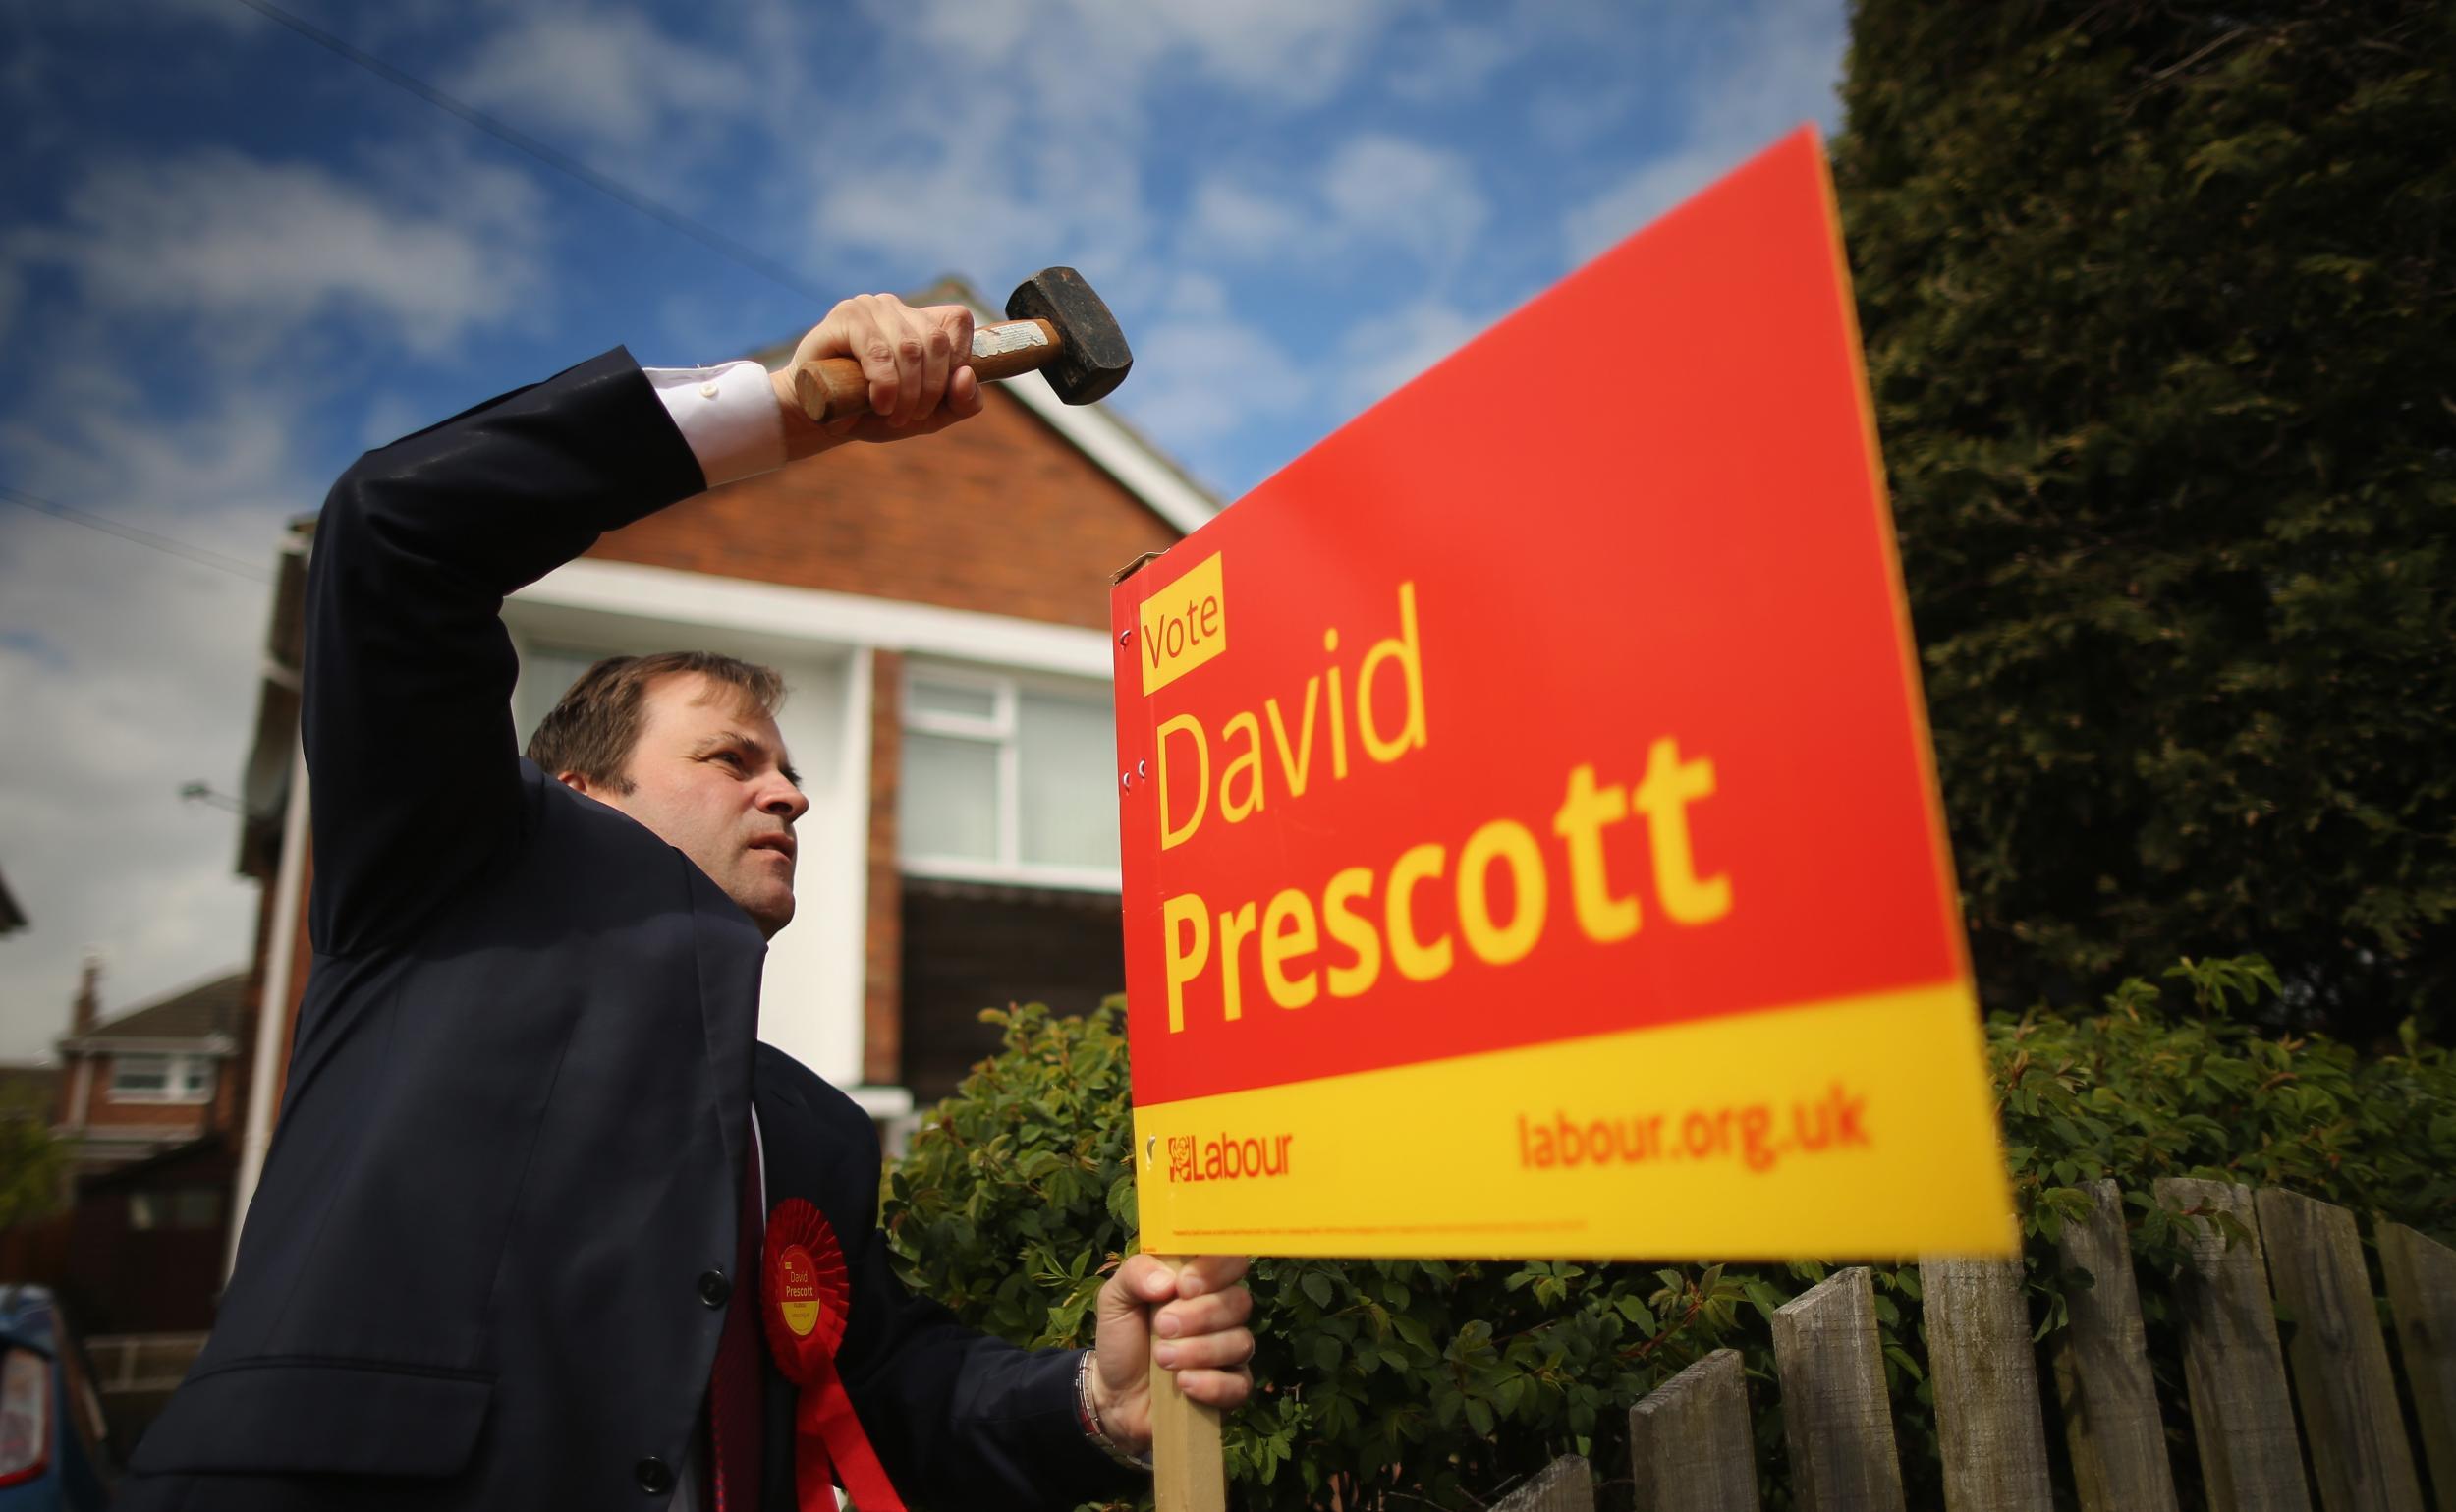 David Prescott failed to win election to parliament in June this year